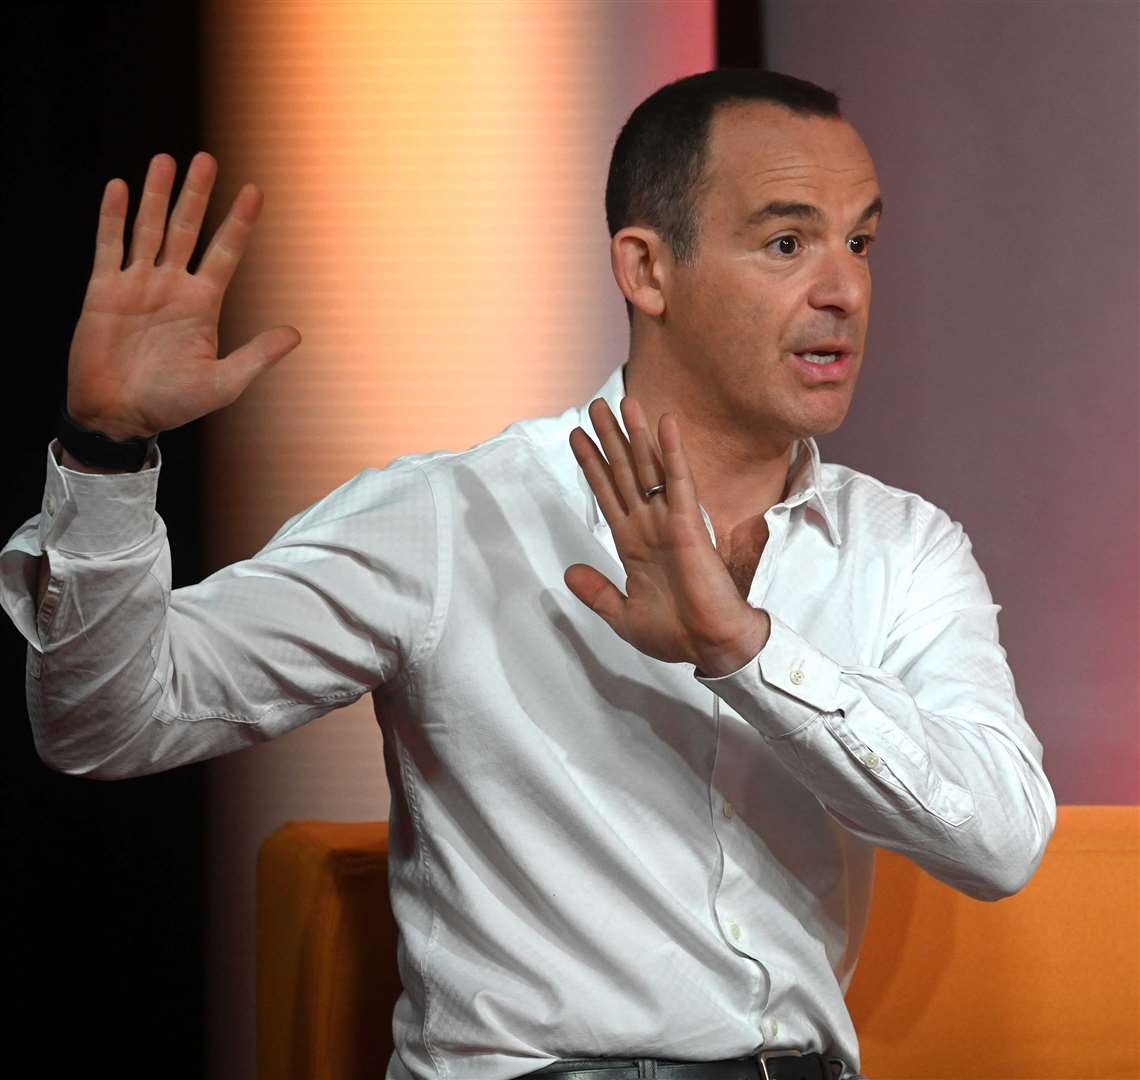 Martin Lewis said the increase ‘smells wrong’ (Jeff Overs/BBC)